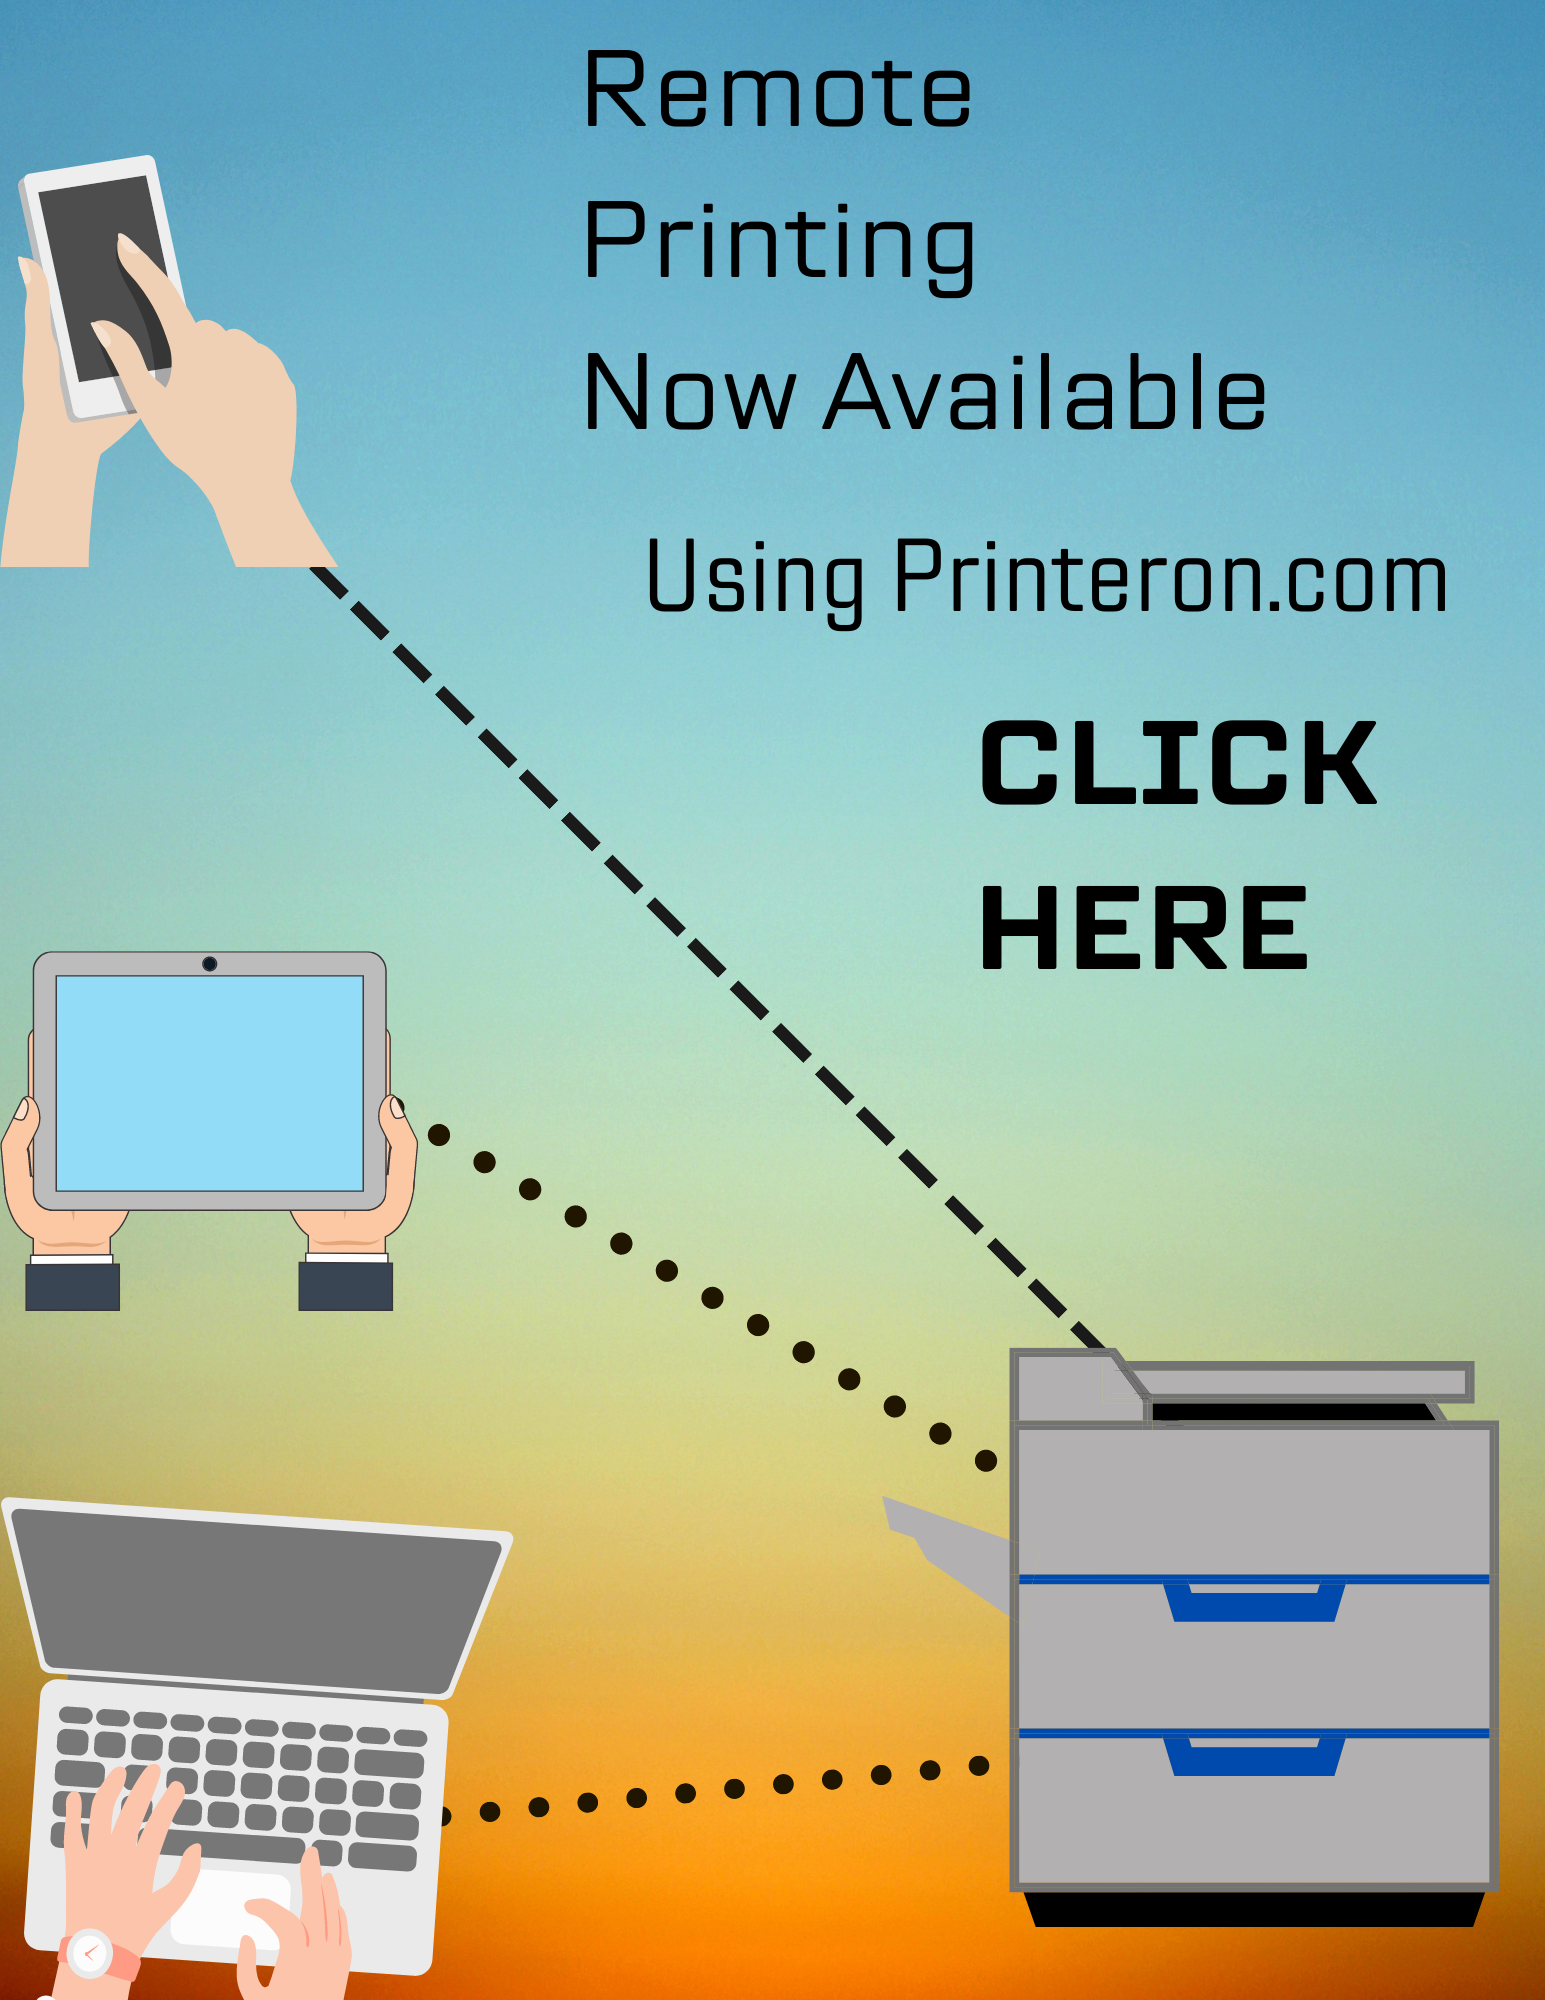 Link to remote printing